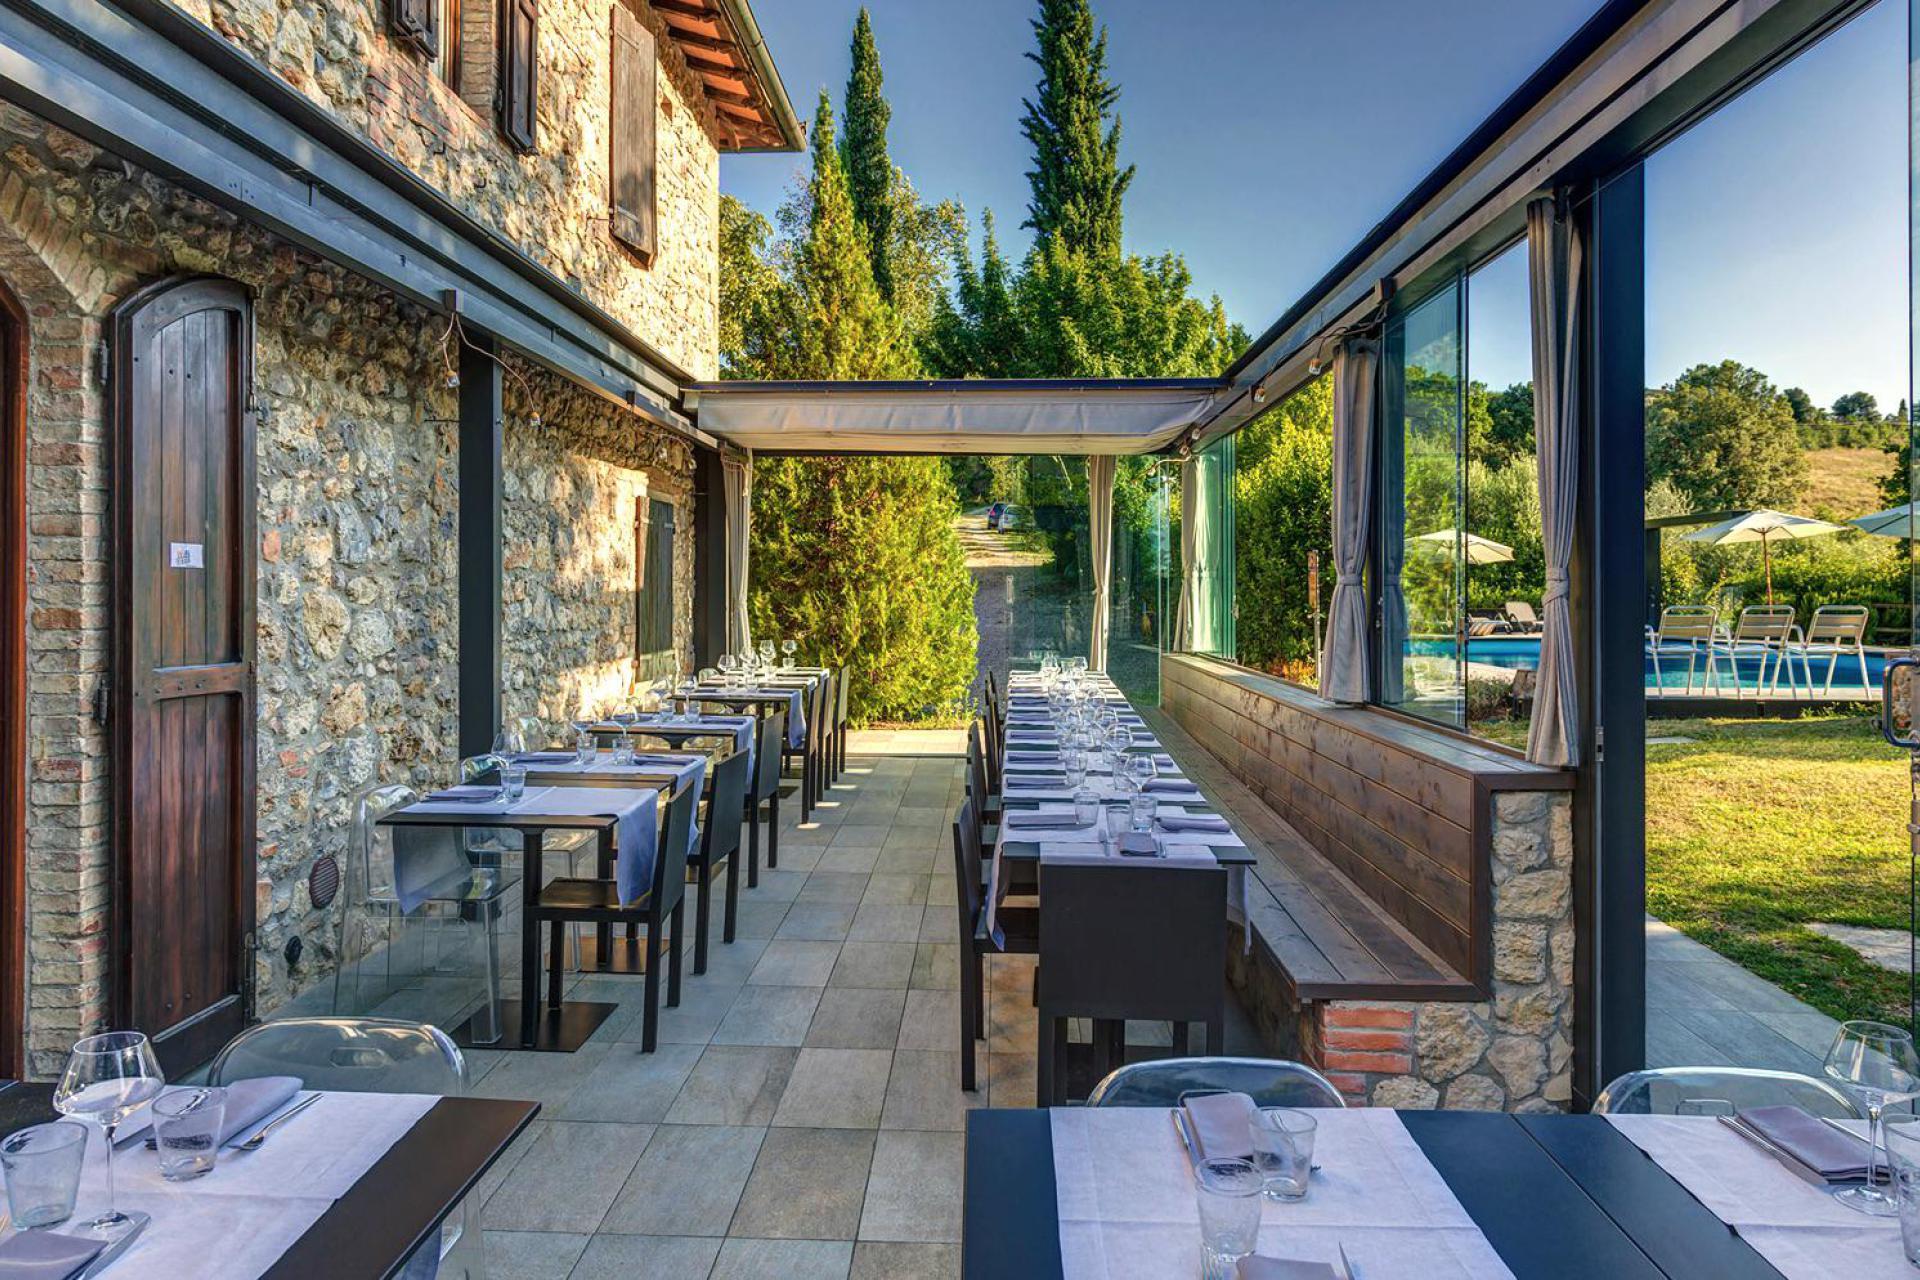 Small agriturismo with wine bar and good restaurant